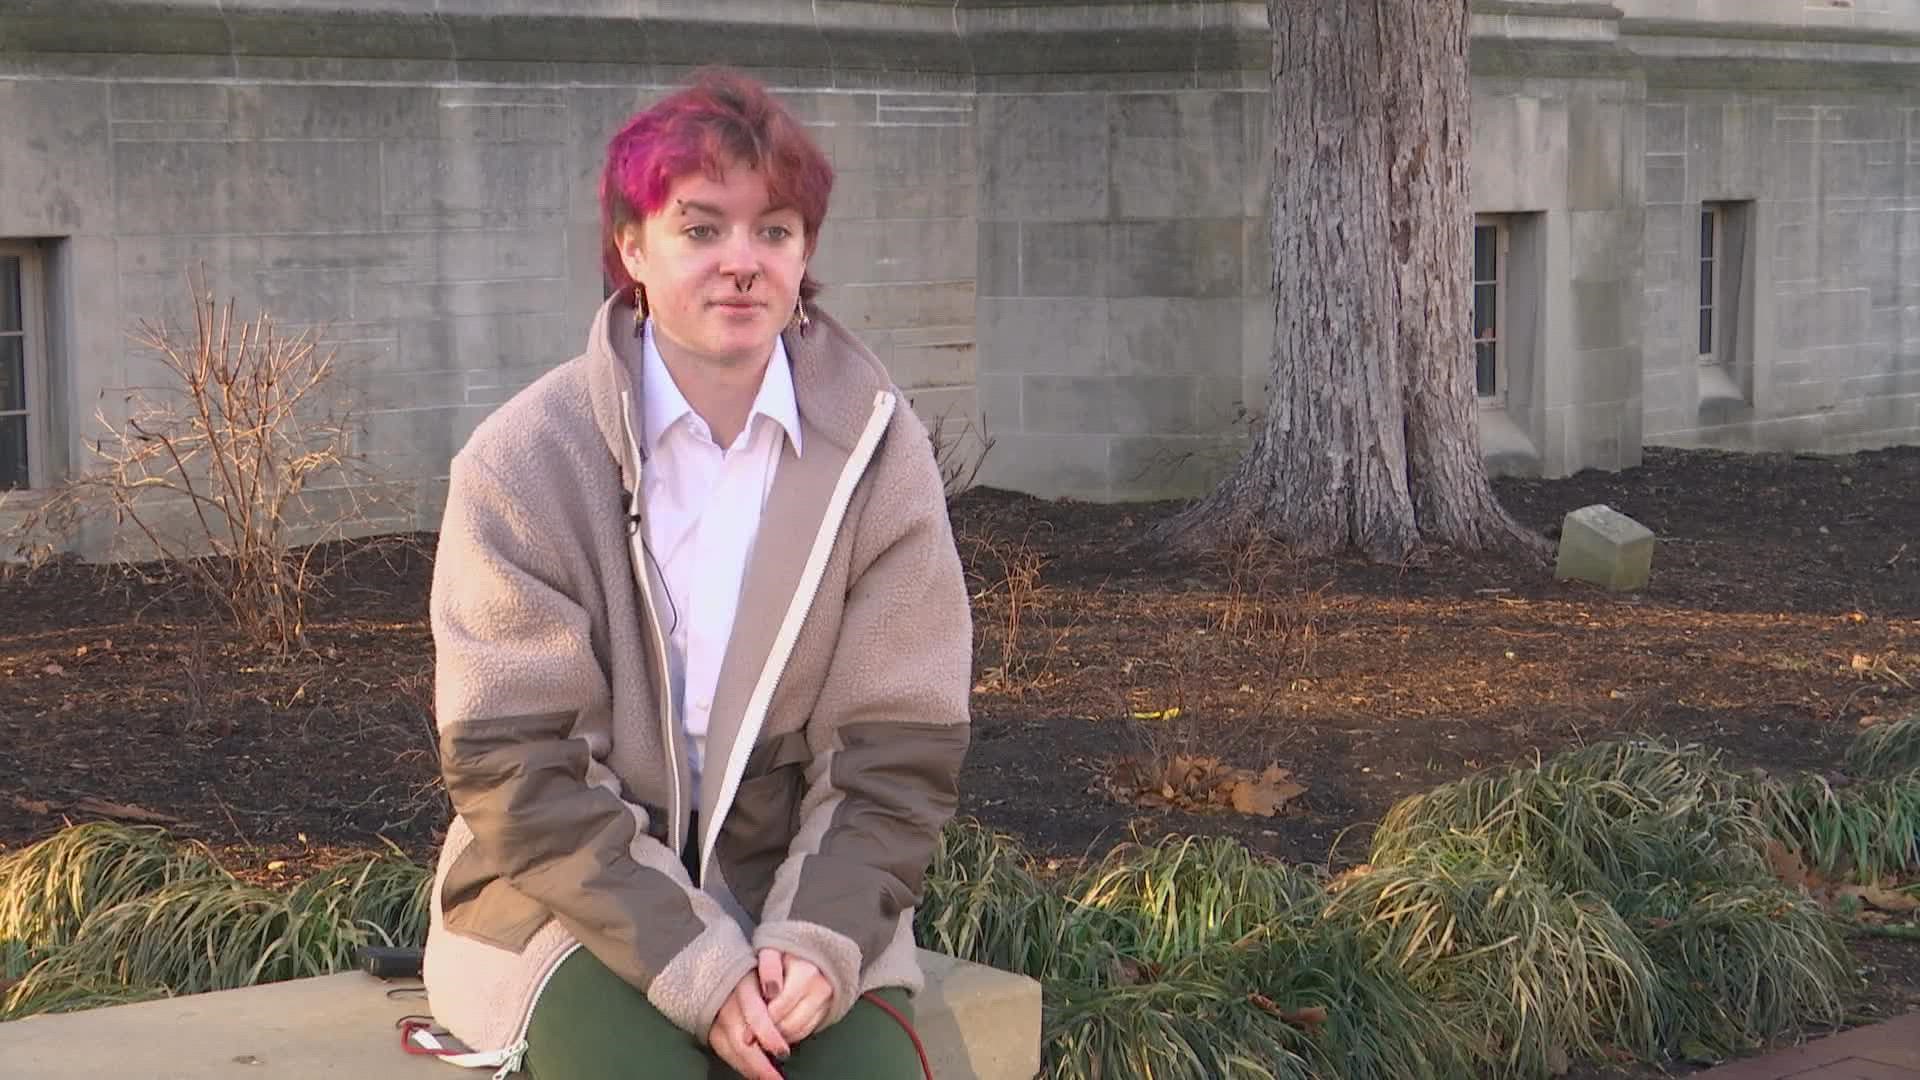 13News' Samantha Johnson spent some time in Bloomington and had the chance to sit down with the student.